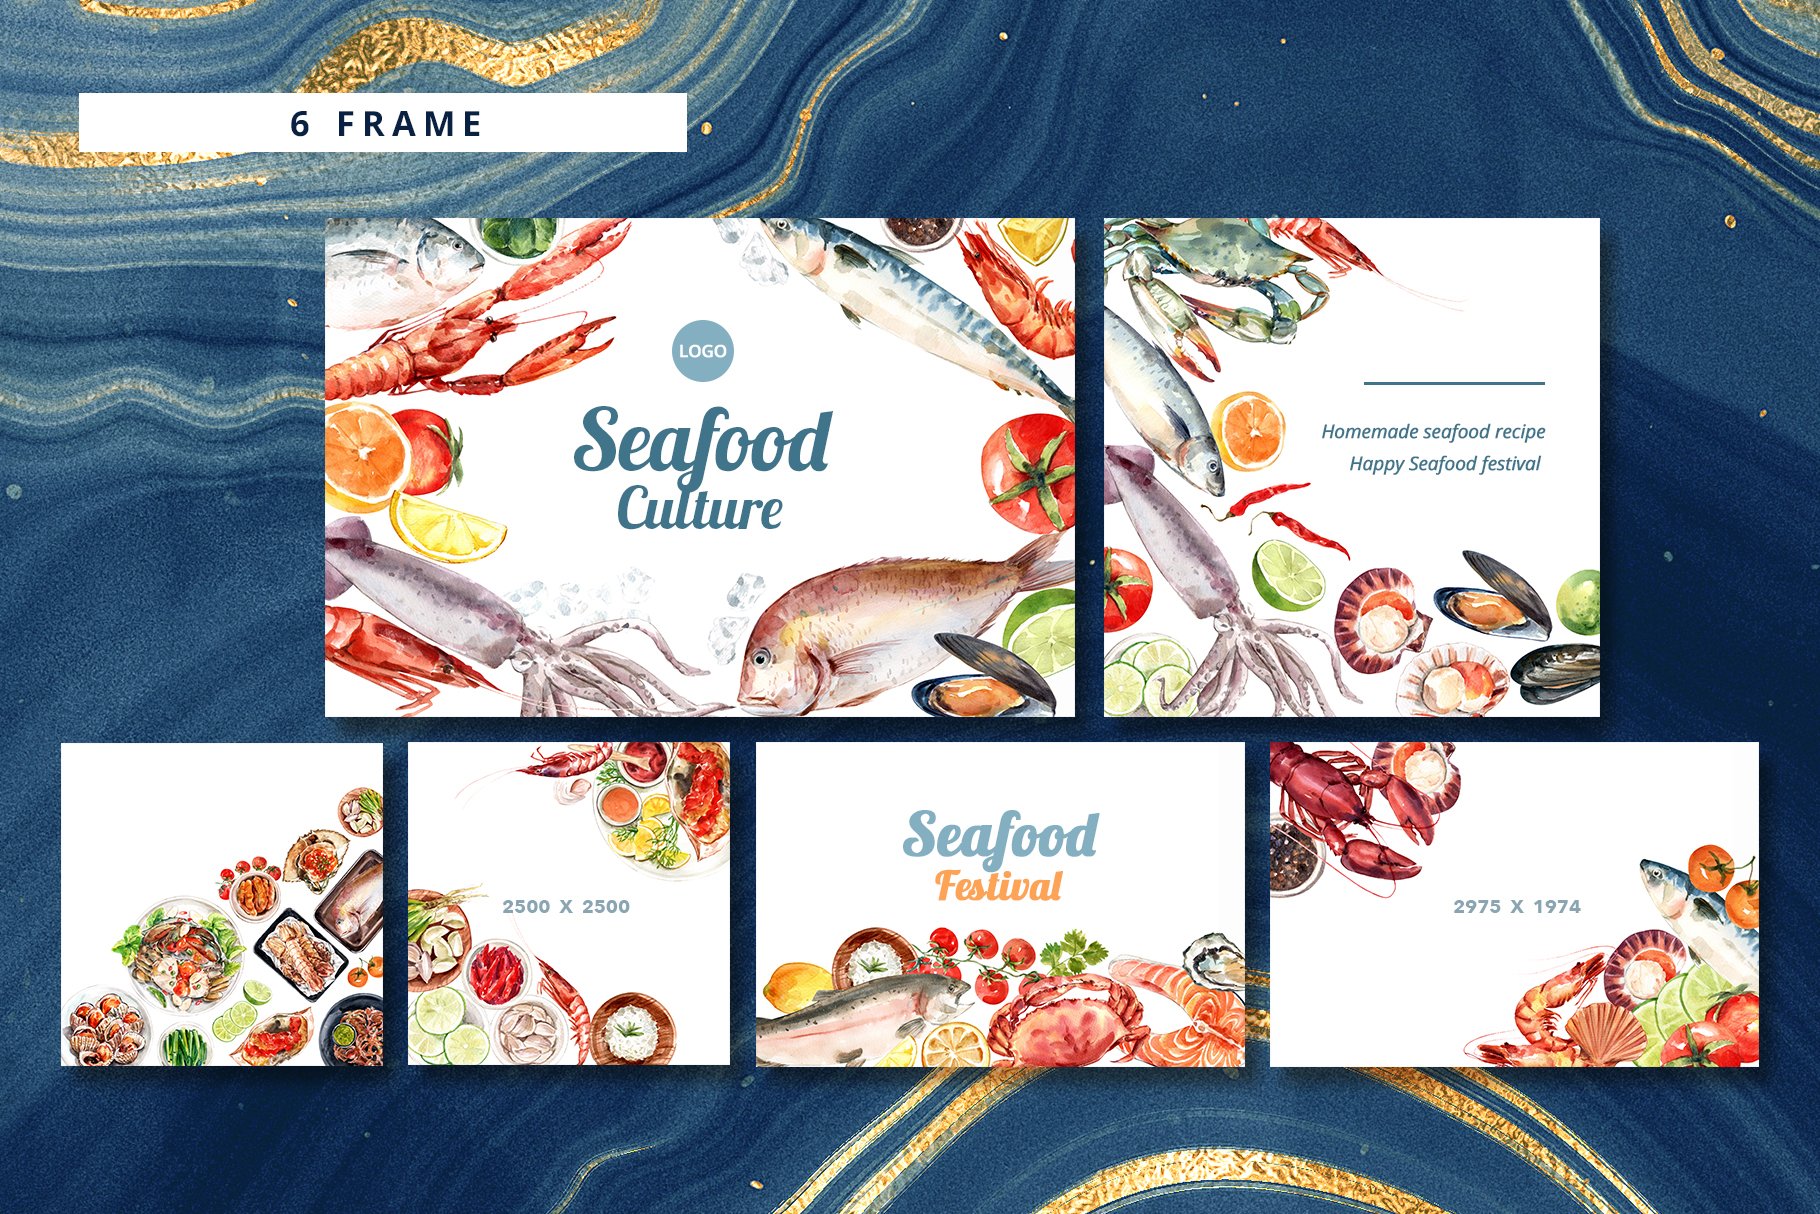 So bright seafood frames.